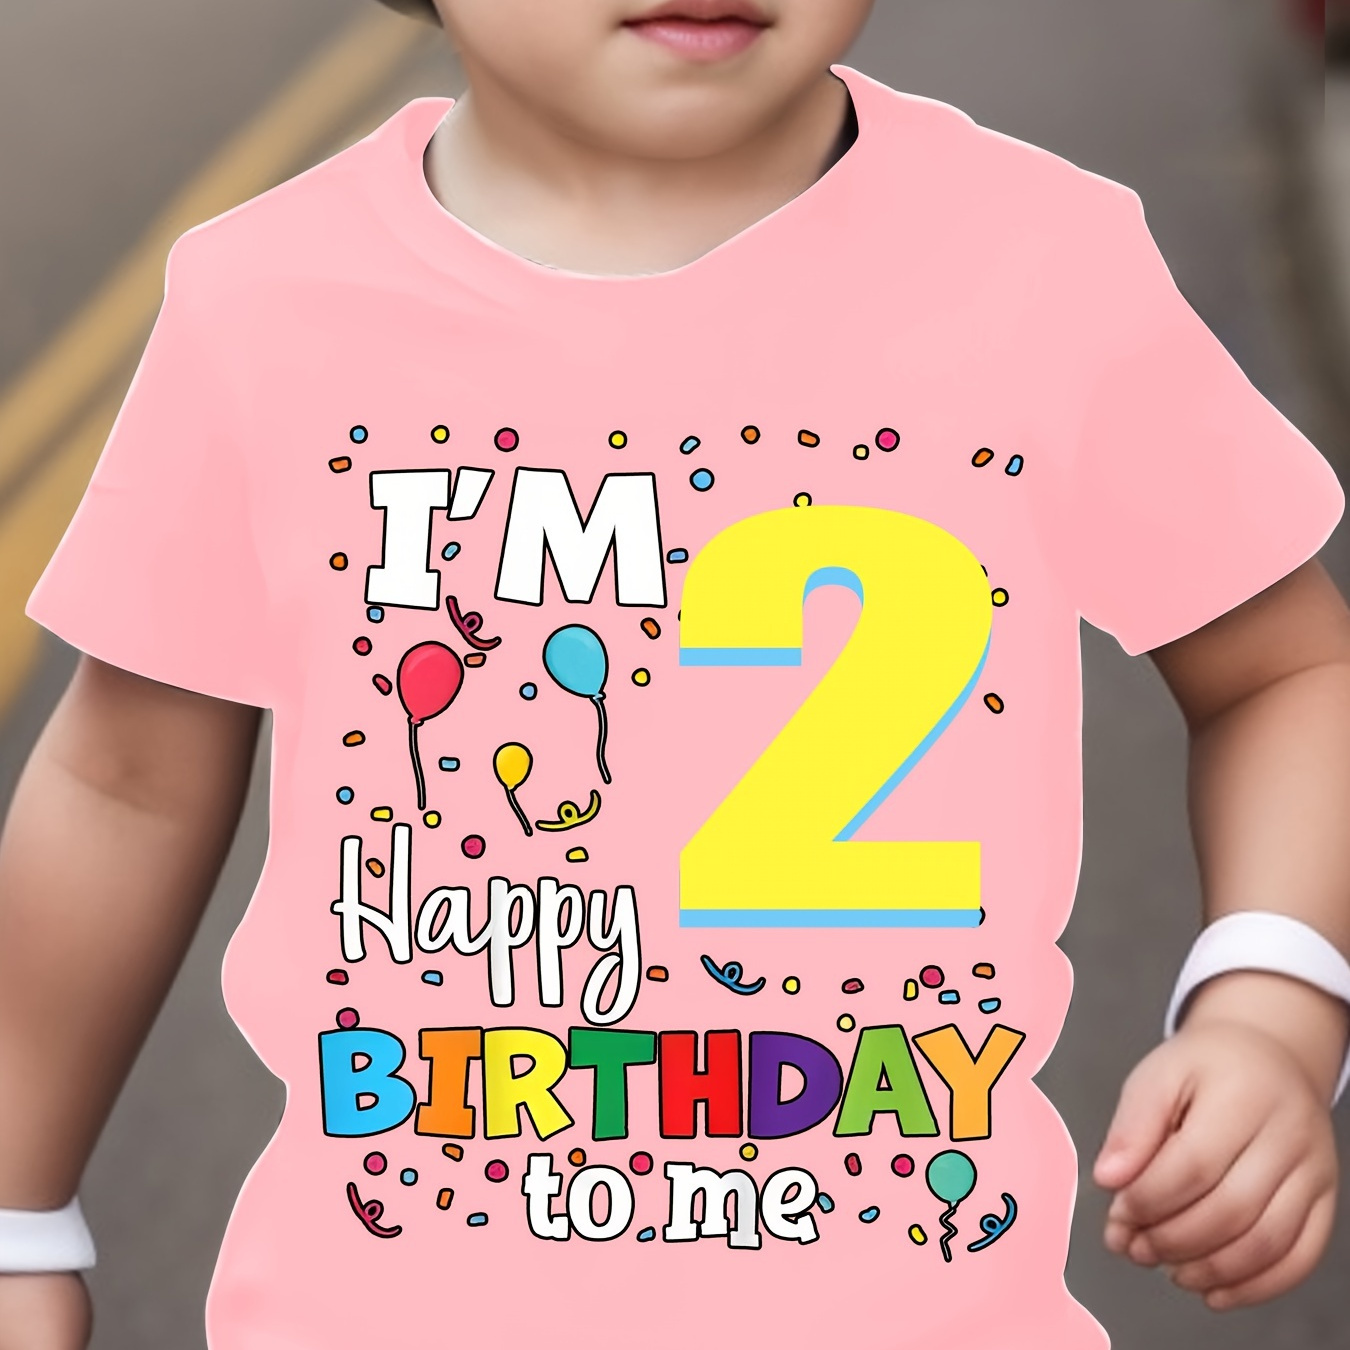 

I'm 2 Happy Birthday To Me' Print Boys Casual Short Sleeve T-shirt Crew Neck Lightweight Comfy Tee For Birthday Party